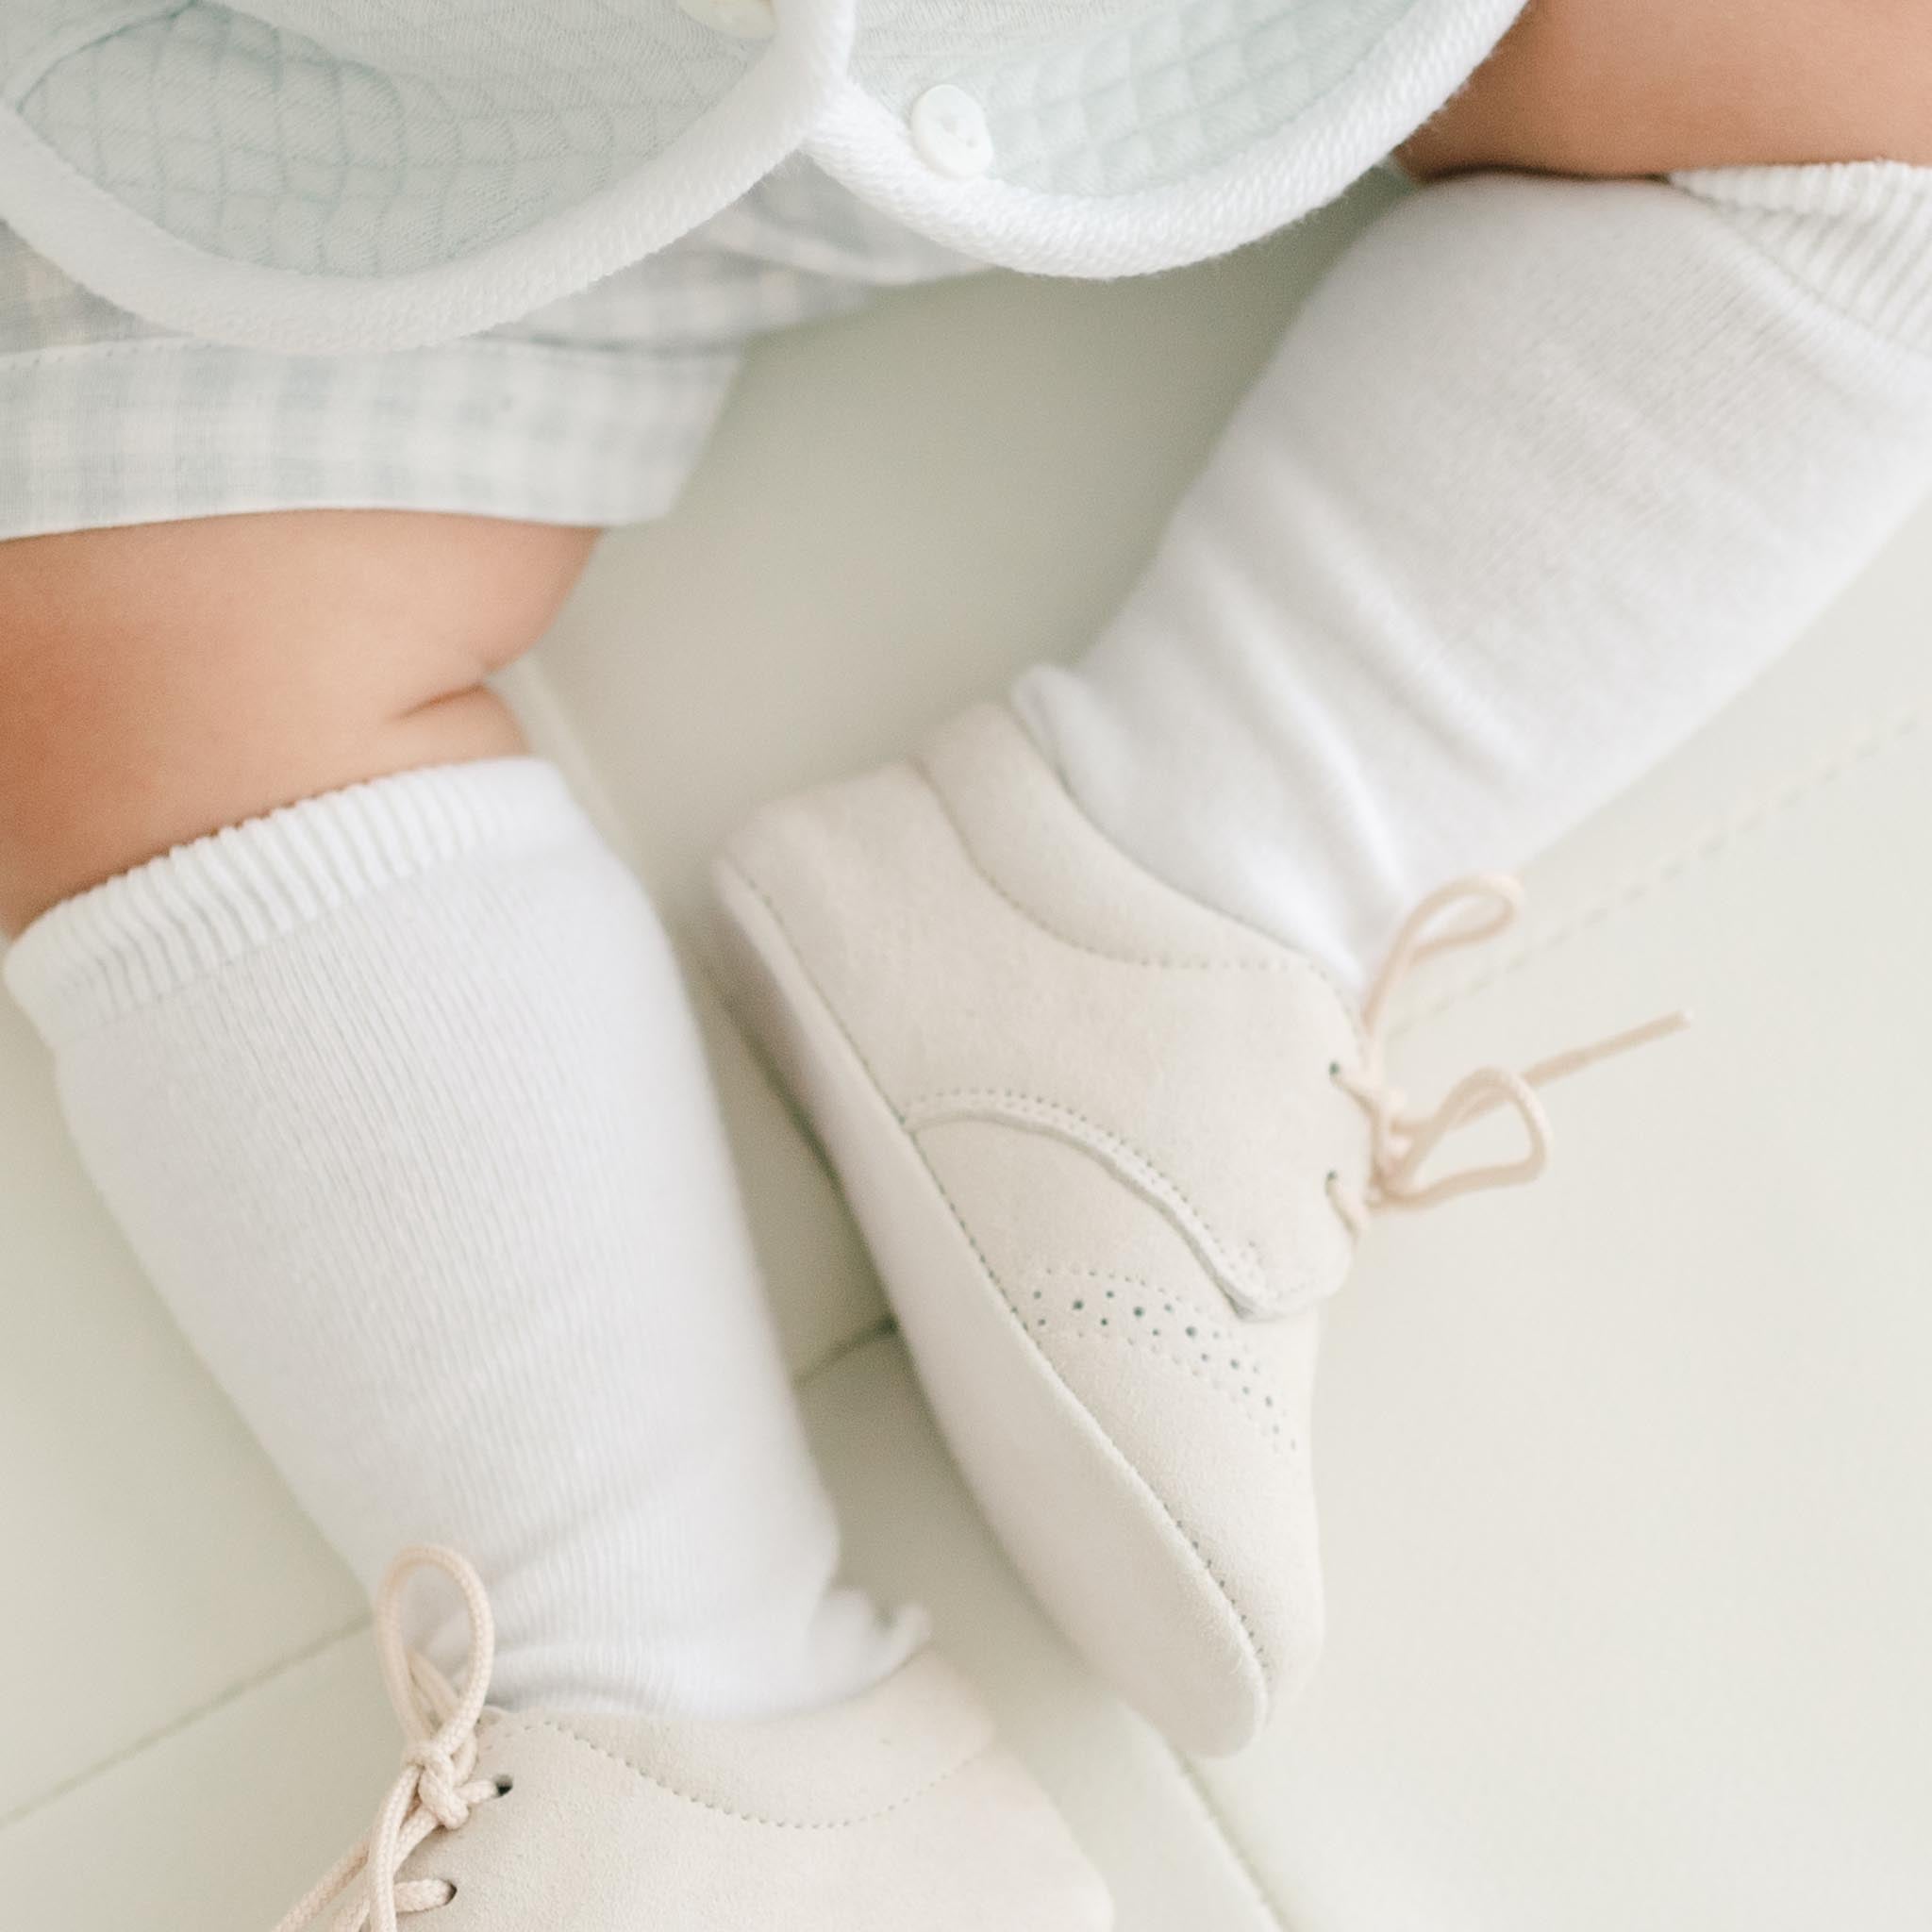 Sock-Attached Kids Clothes : Pippy Pants